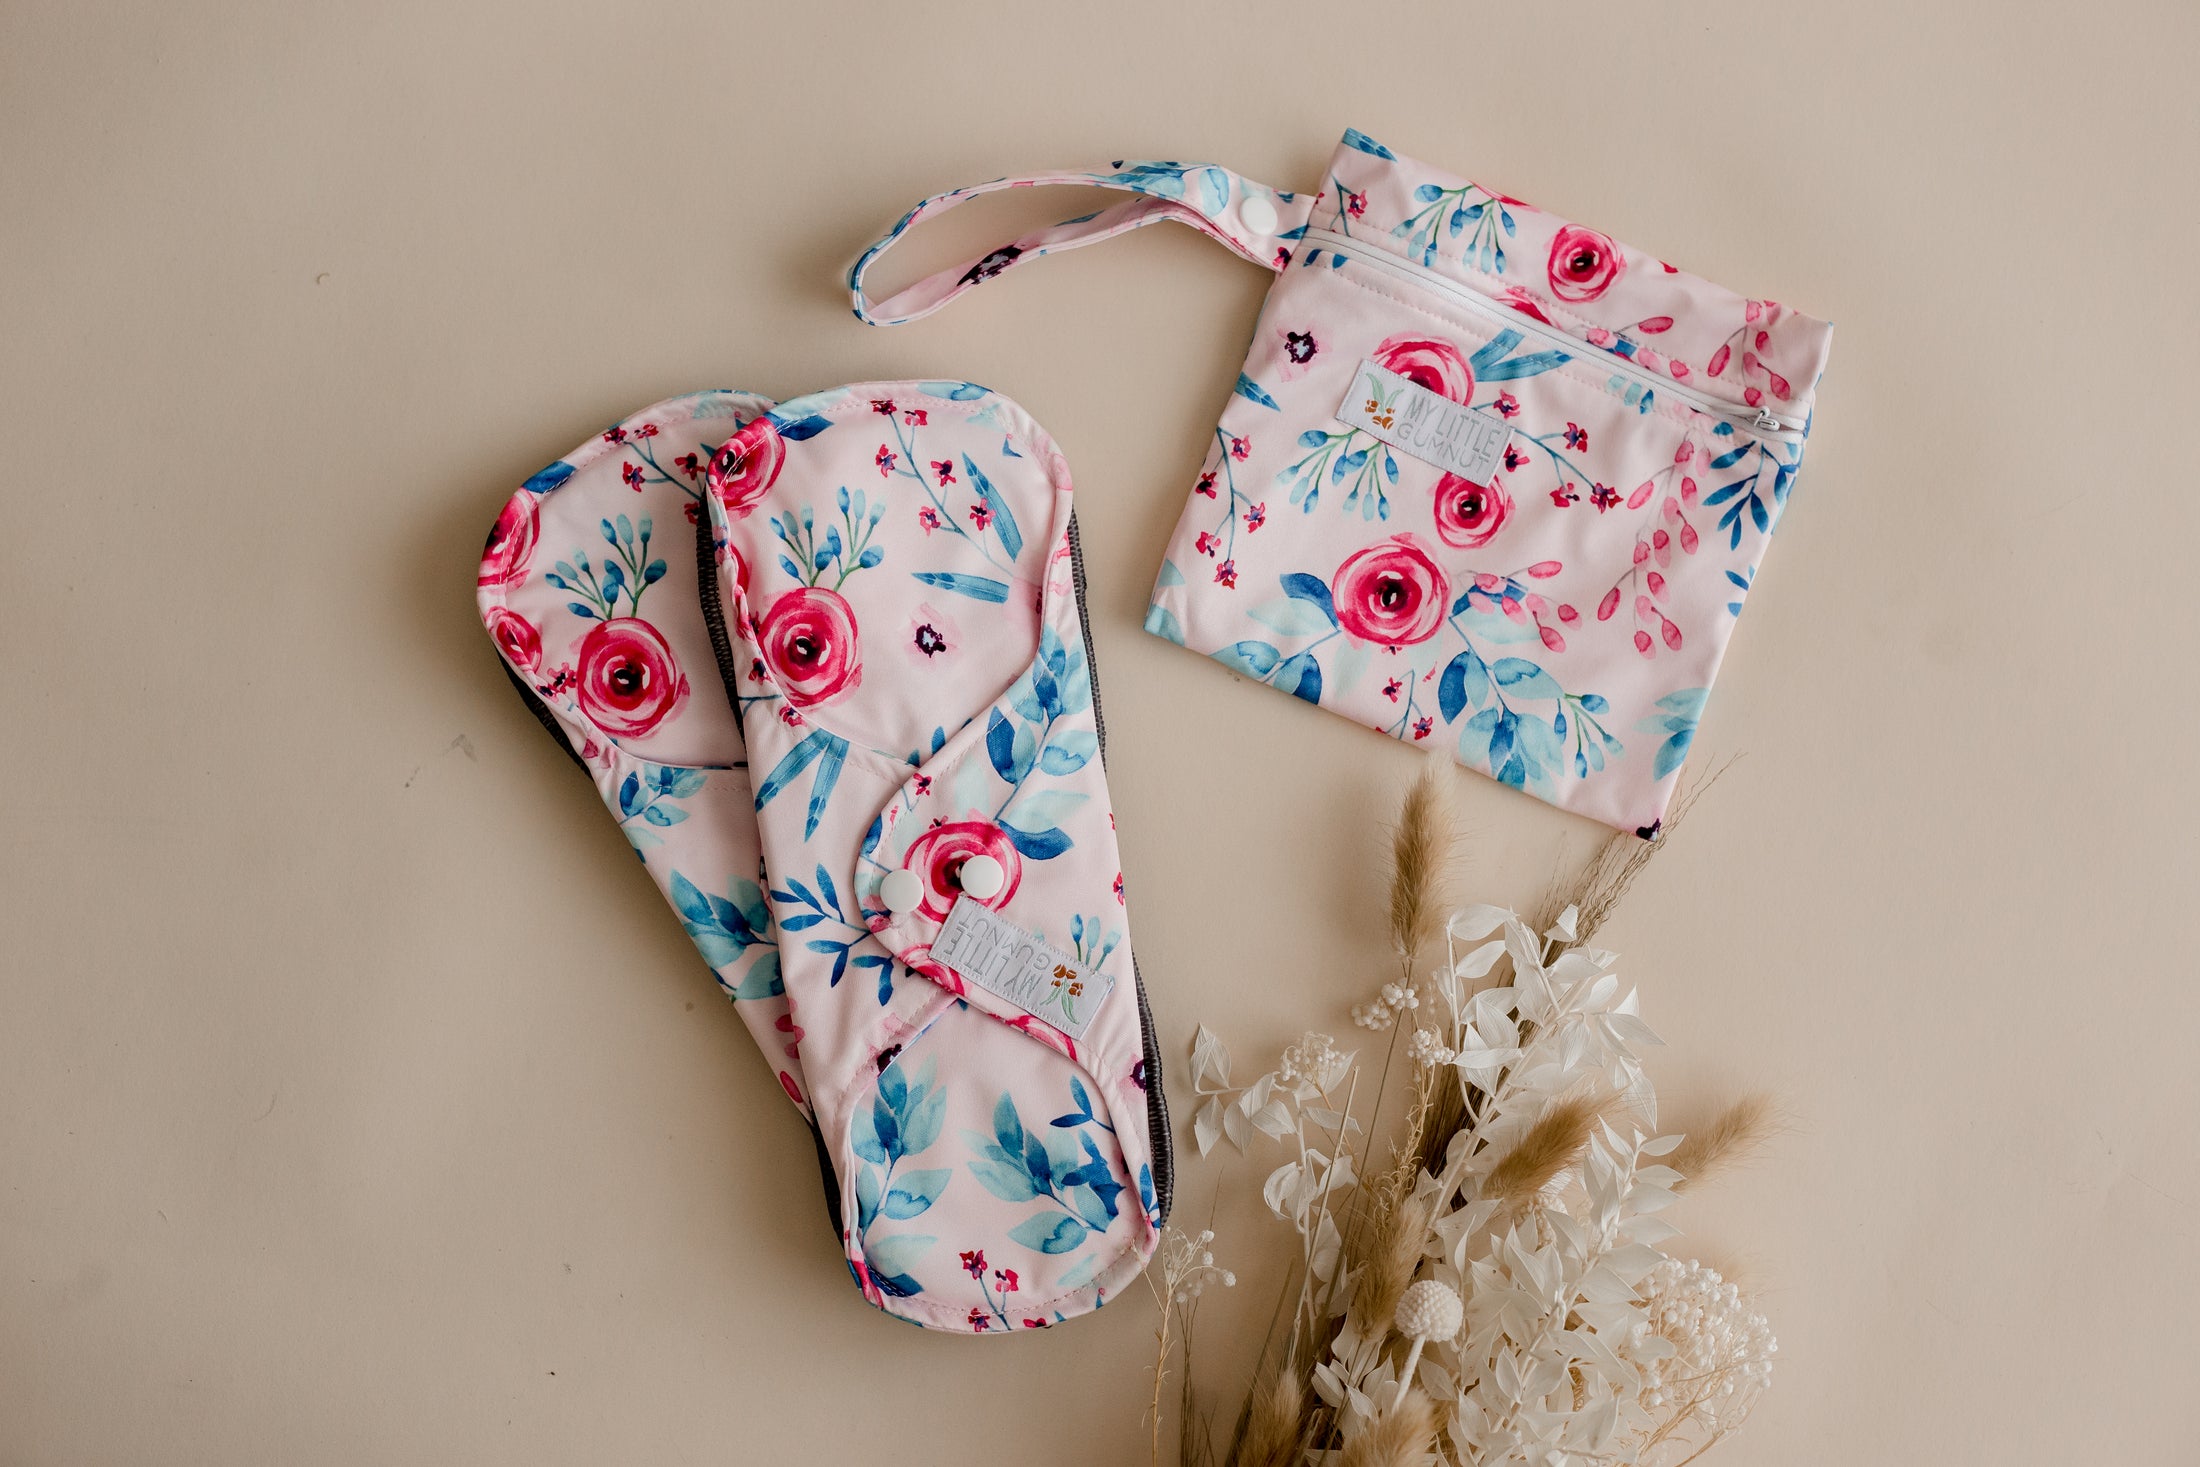 Reusable Menstrual Pads by My Little Gumnut. Cloth Pads Australia. Period pads. Floral menstrual pads. 2 Pack Menstrual Pads with small wet bag. 